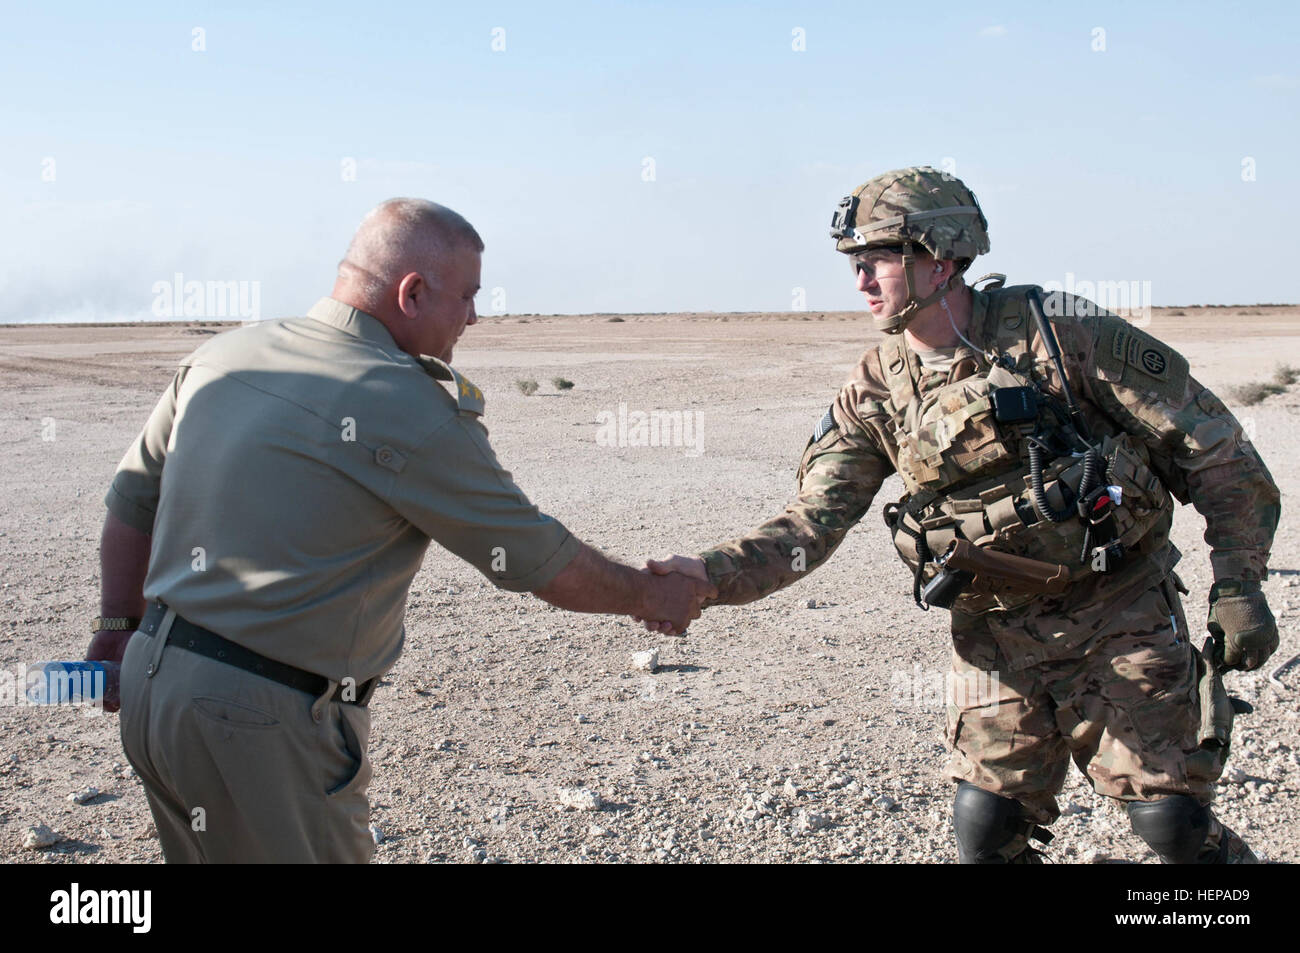 Brig. Gen. Hassan Mohamed Zieer, commander of Iraq’s Bomb Disposal School, (left) and Maj. Robert Tracy, executive officer of the 2nd Battalion, 505th Parachute Infantry Regiment, 3rd Brigade Combat Team, 82nd Airborne Division, shake hands after observing a successful d breaching operation at Besmaya Range Complex, Iraq, April 14, 2015. Sappers with the 2-505th PIR and members of the U.S. explosive ordinance disposal team demolished concrete barriers in preparation for a breaching class with Iraqi army soldiers of the 16th Division. (Photo by Sgt. Deja Borden, CJTF-OIR Public Affairs) Buildin Stock Photo